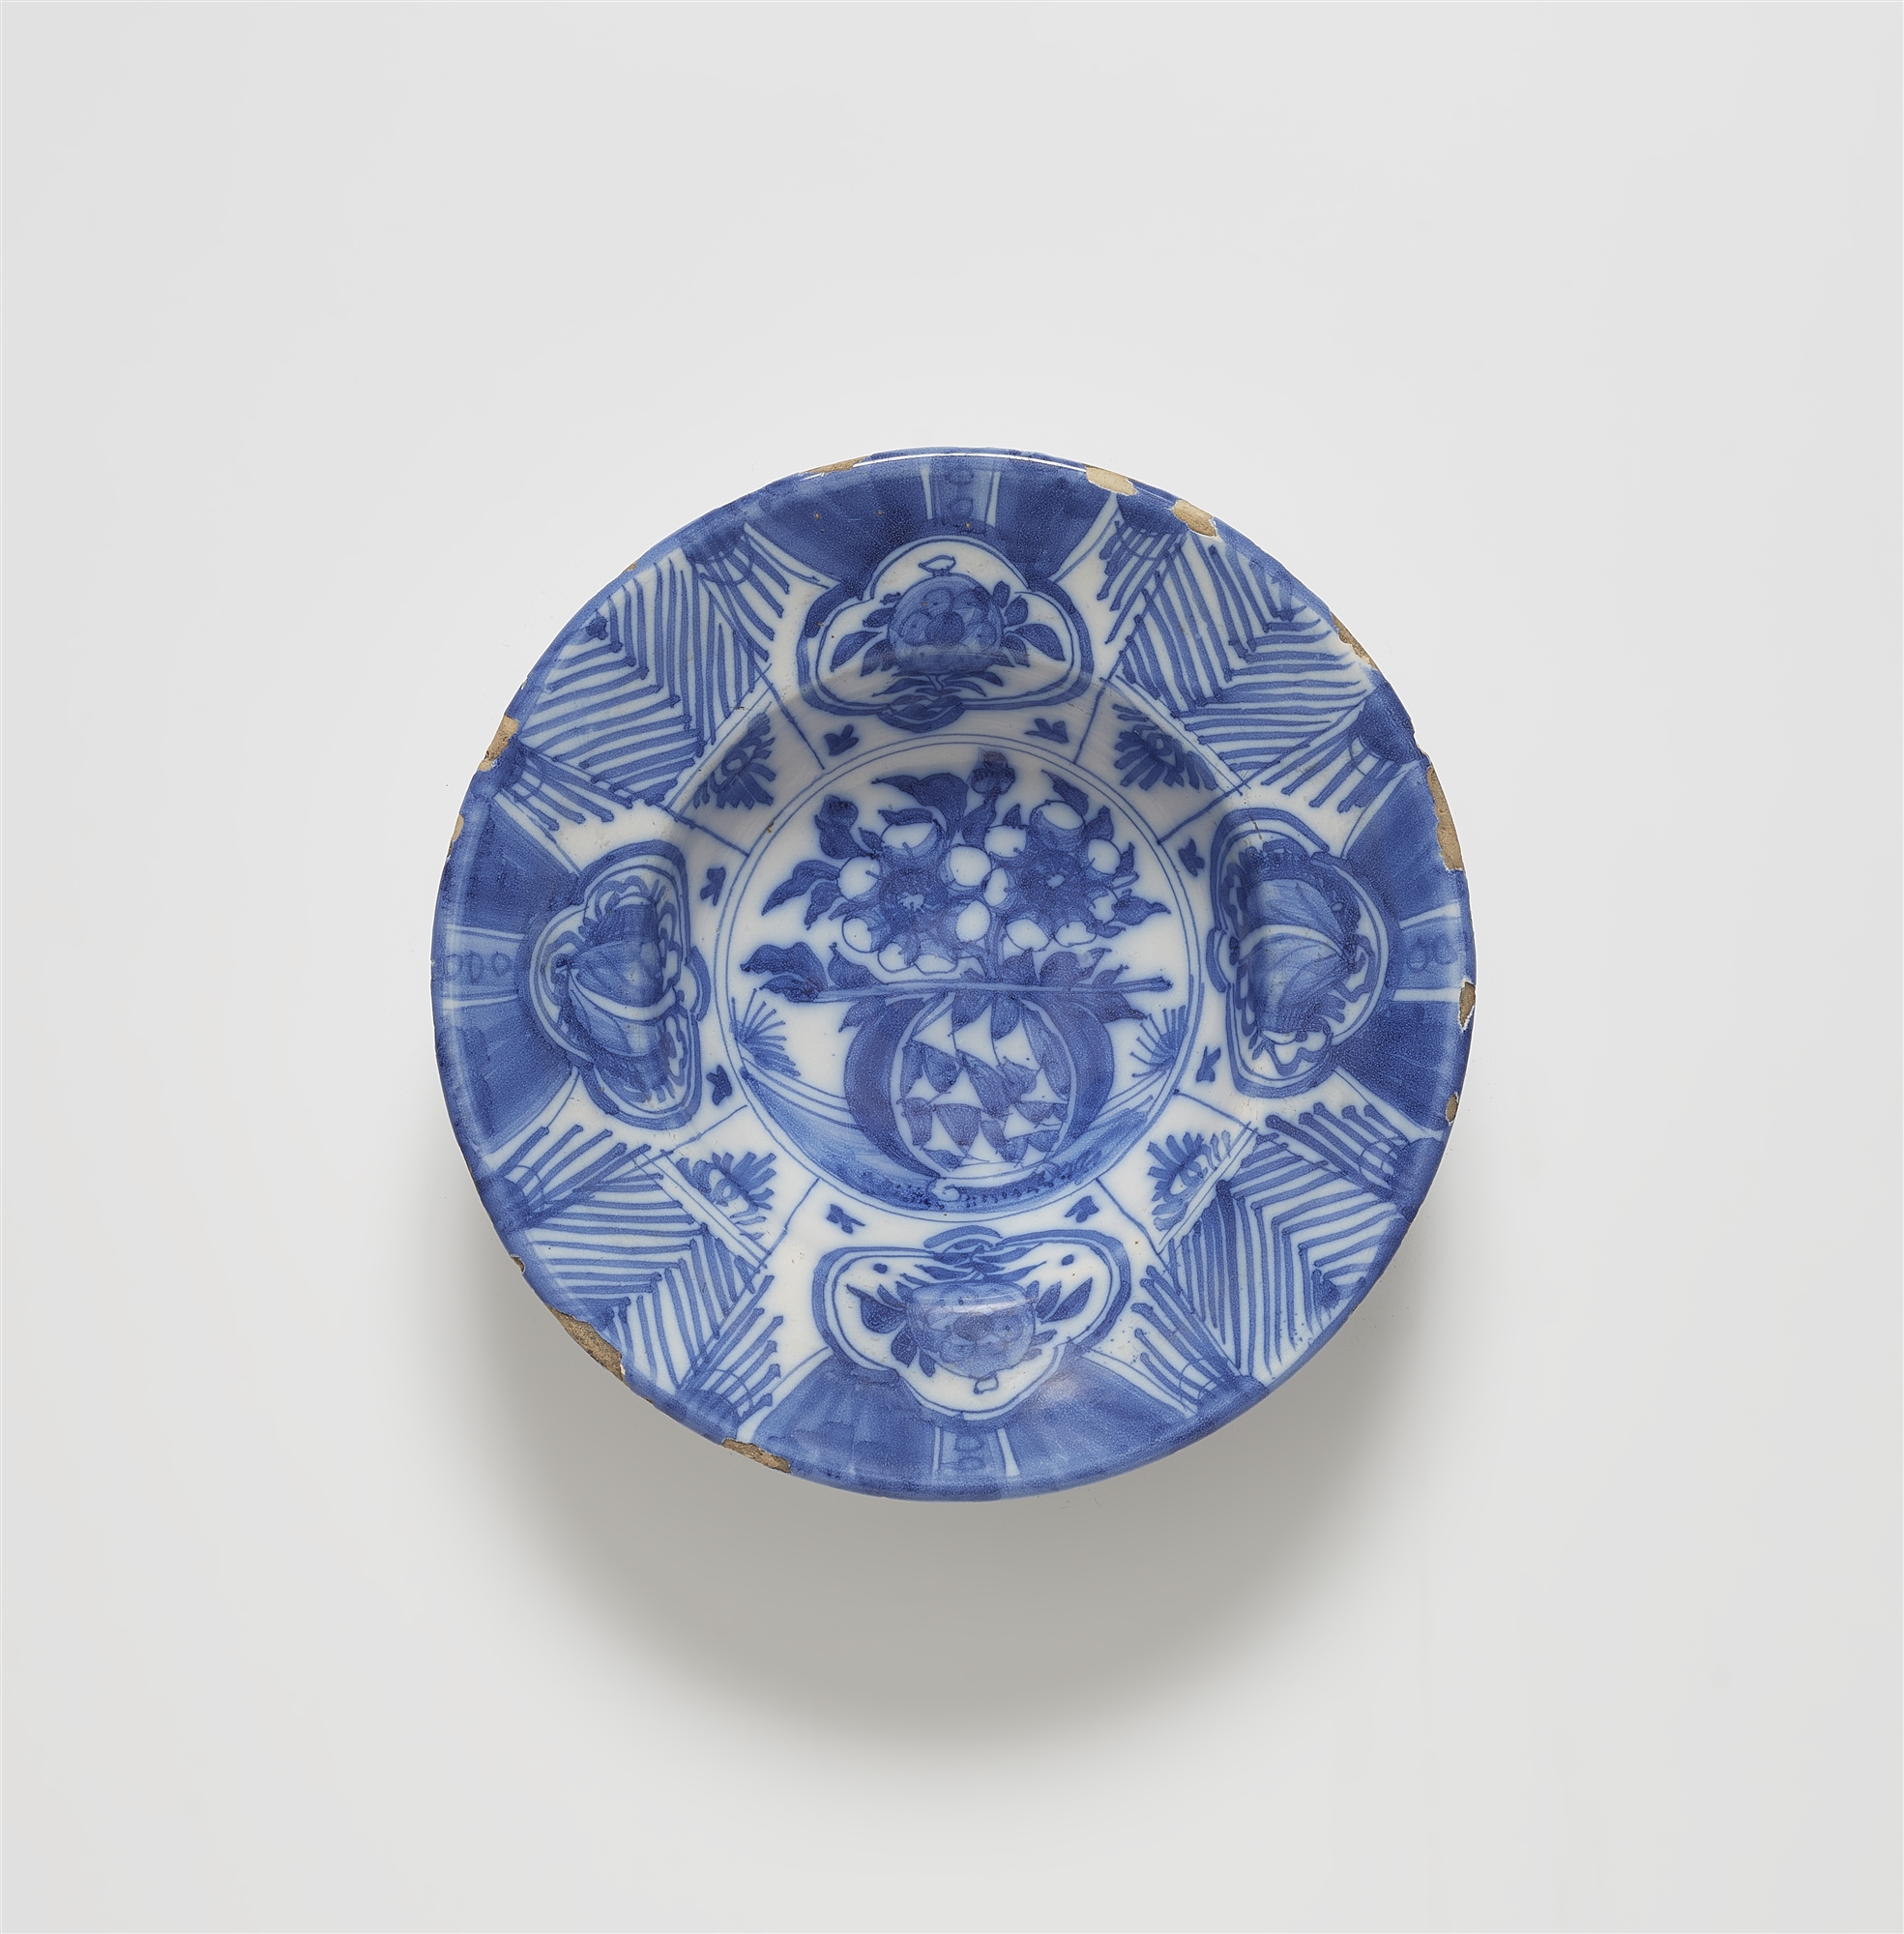 A Delftware dish with Wanli style decor